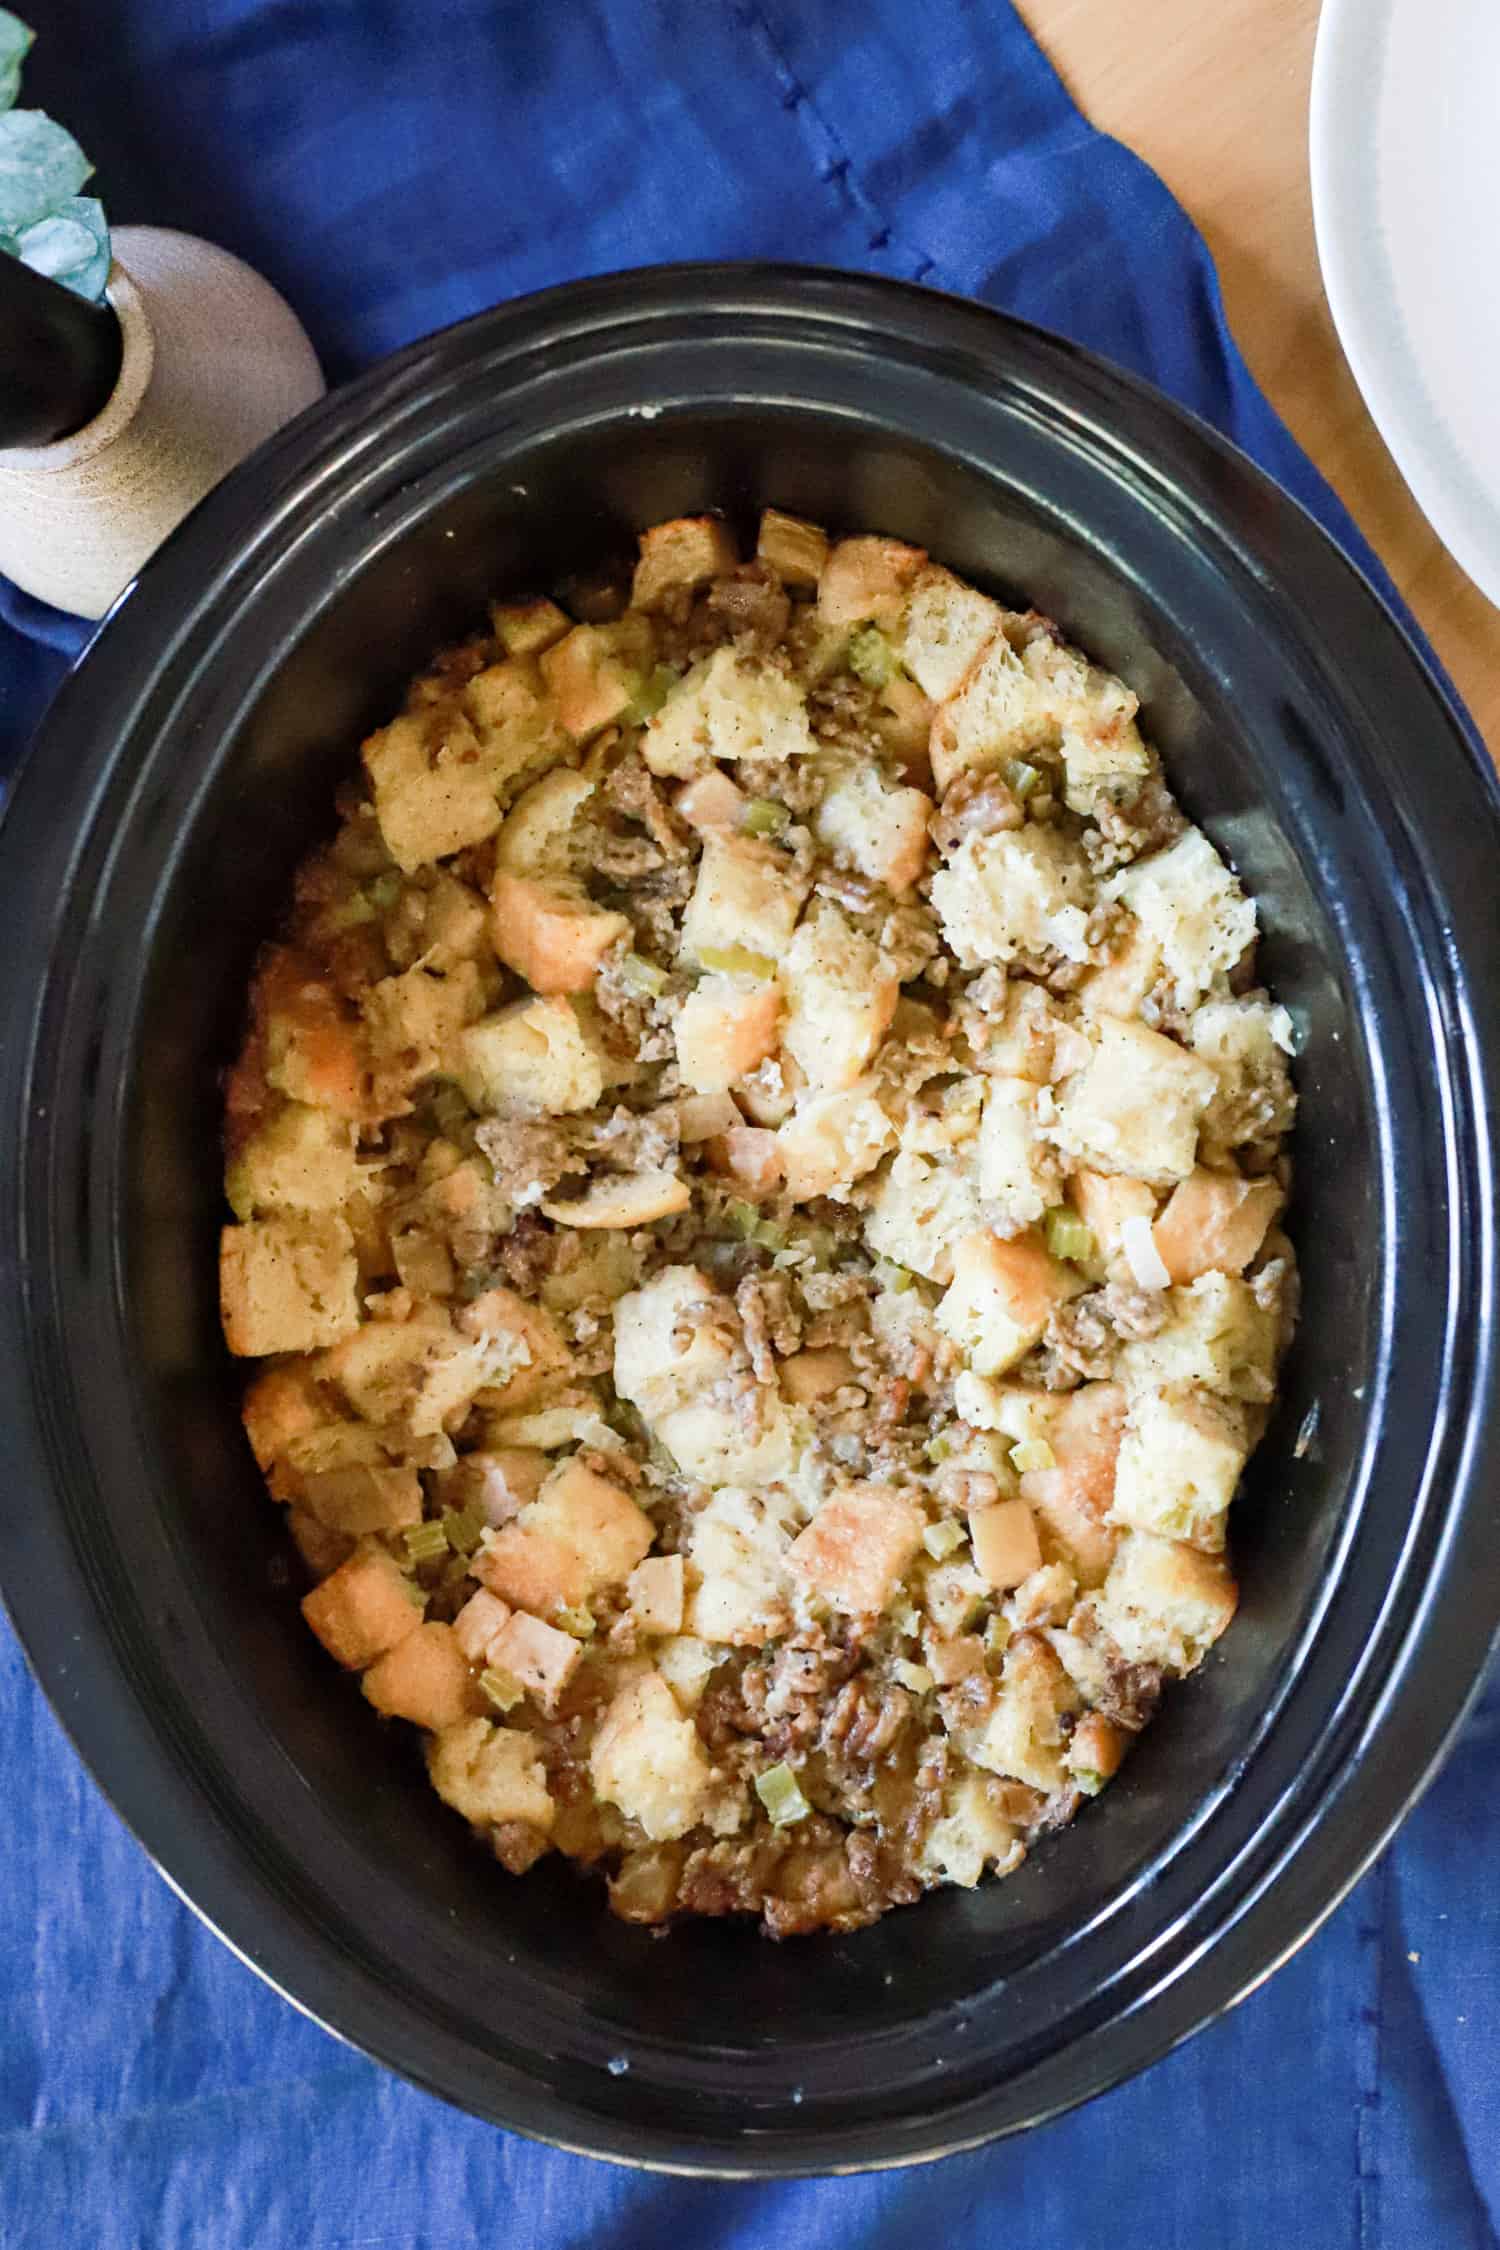 top view of slow cooker sausage stuffing with apples and celery.